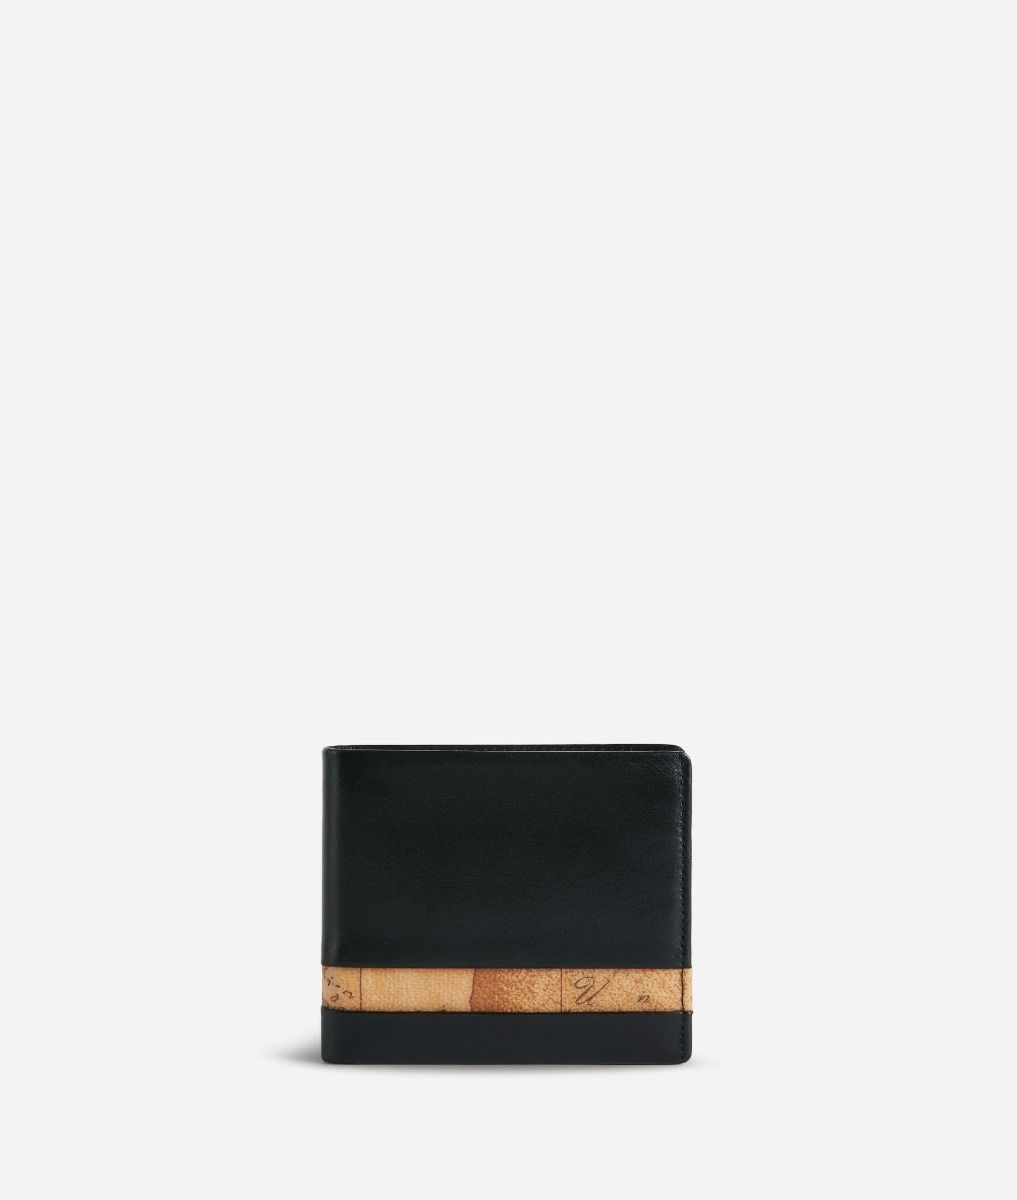 Geo Classic medium wallet in leather black,front